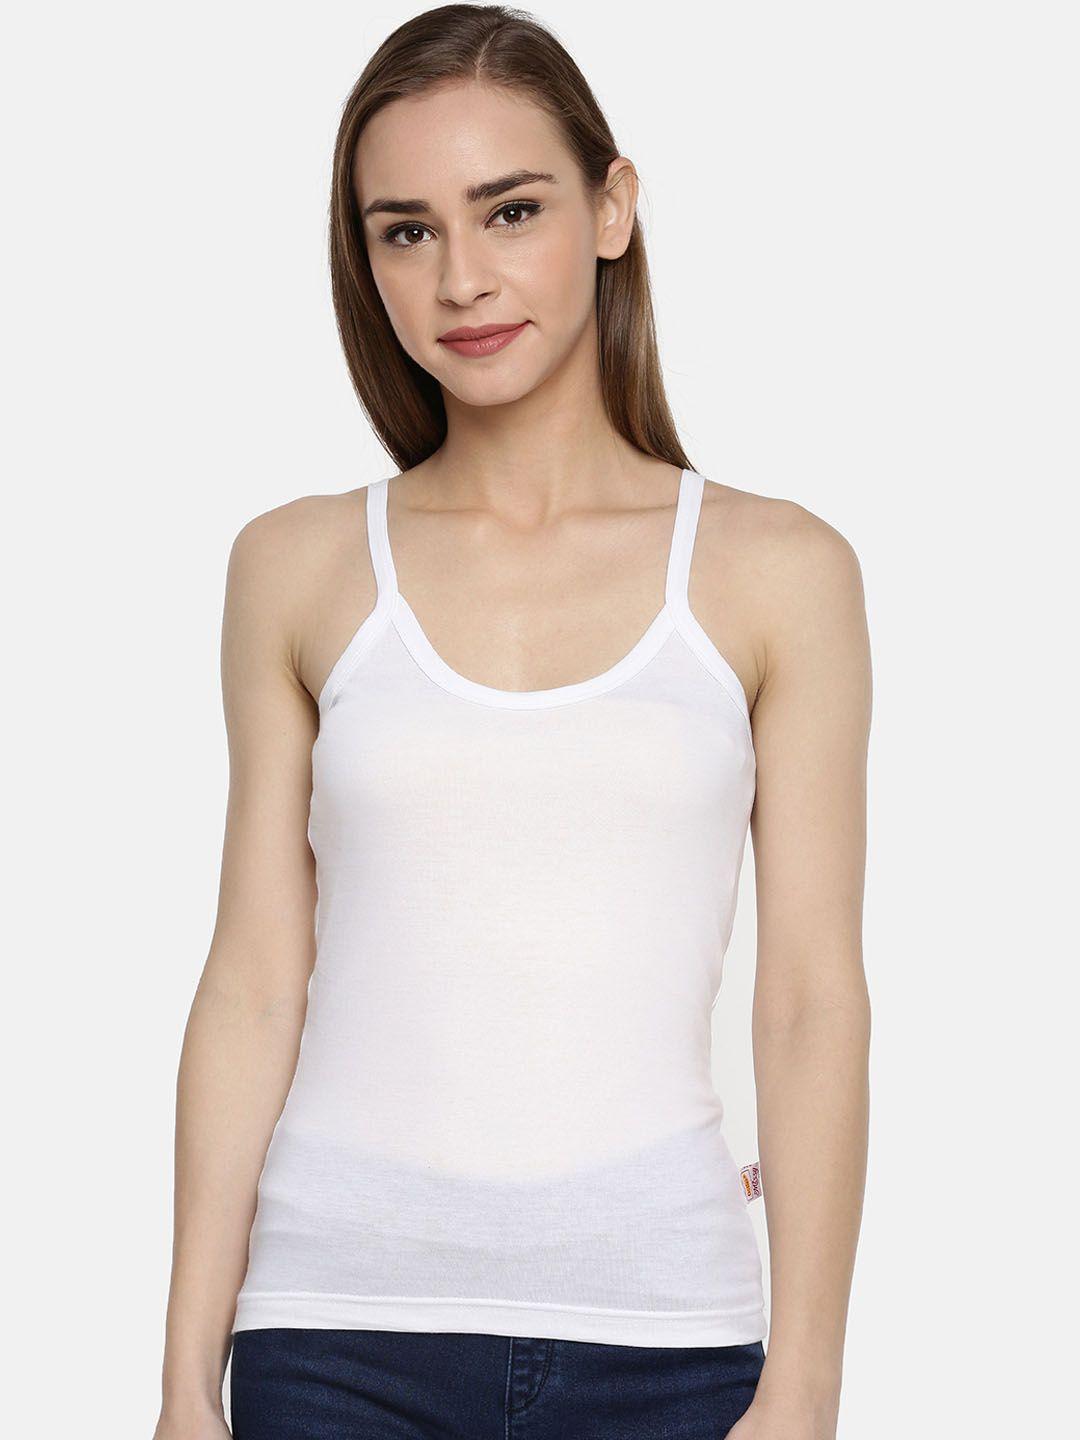 dollar missy pack of 5 women combed cotton camisole